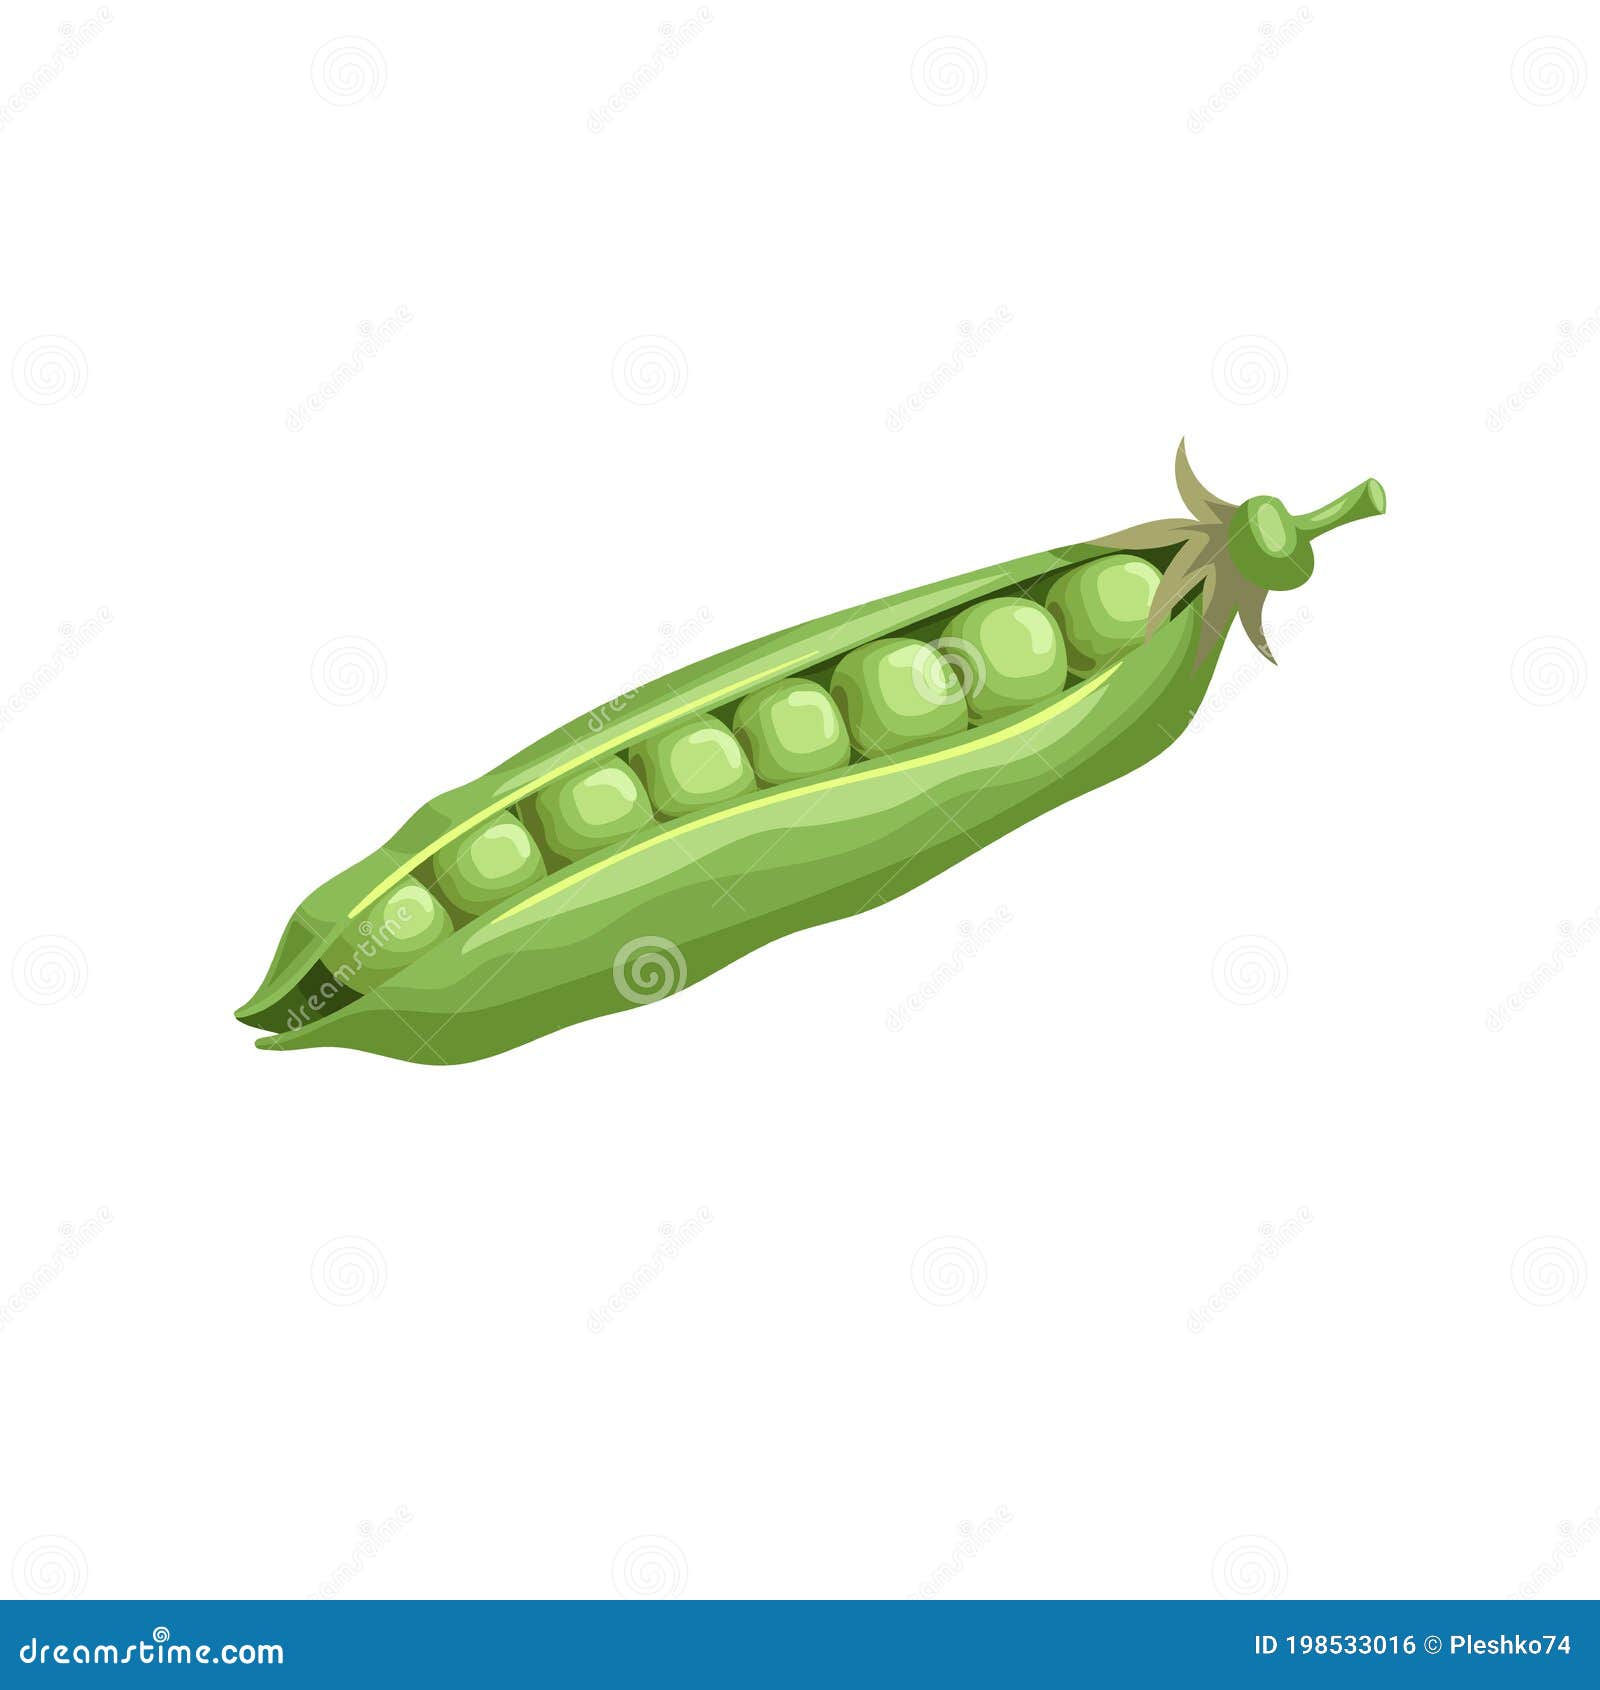 Cartoon Green Pea Open Pod with Seeds. Single Vegetable. Fresh Farm  Product. Eco Nutrition Stock Vector - Illustration of eating, healthy:  198533016